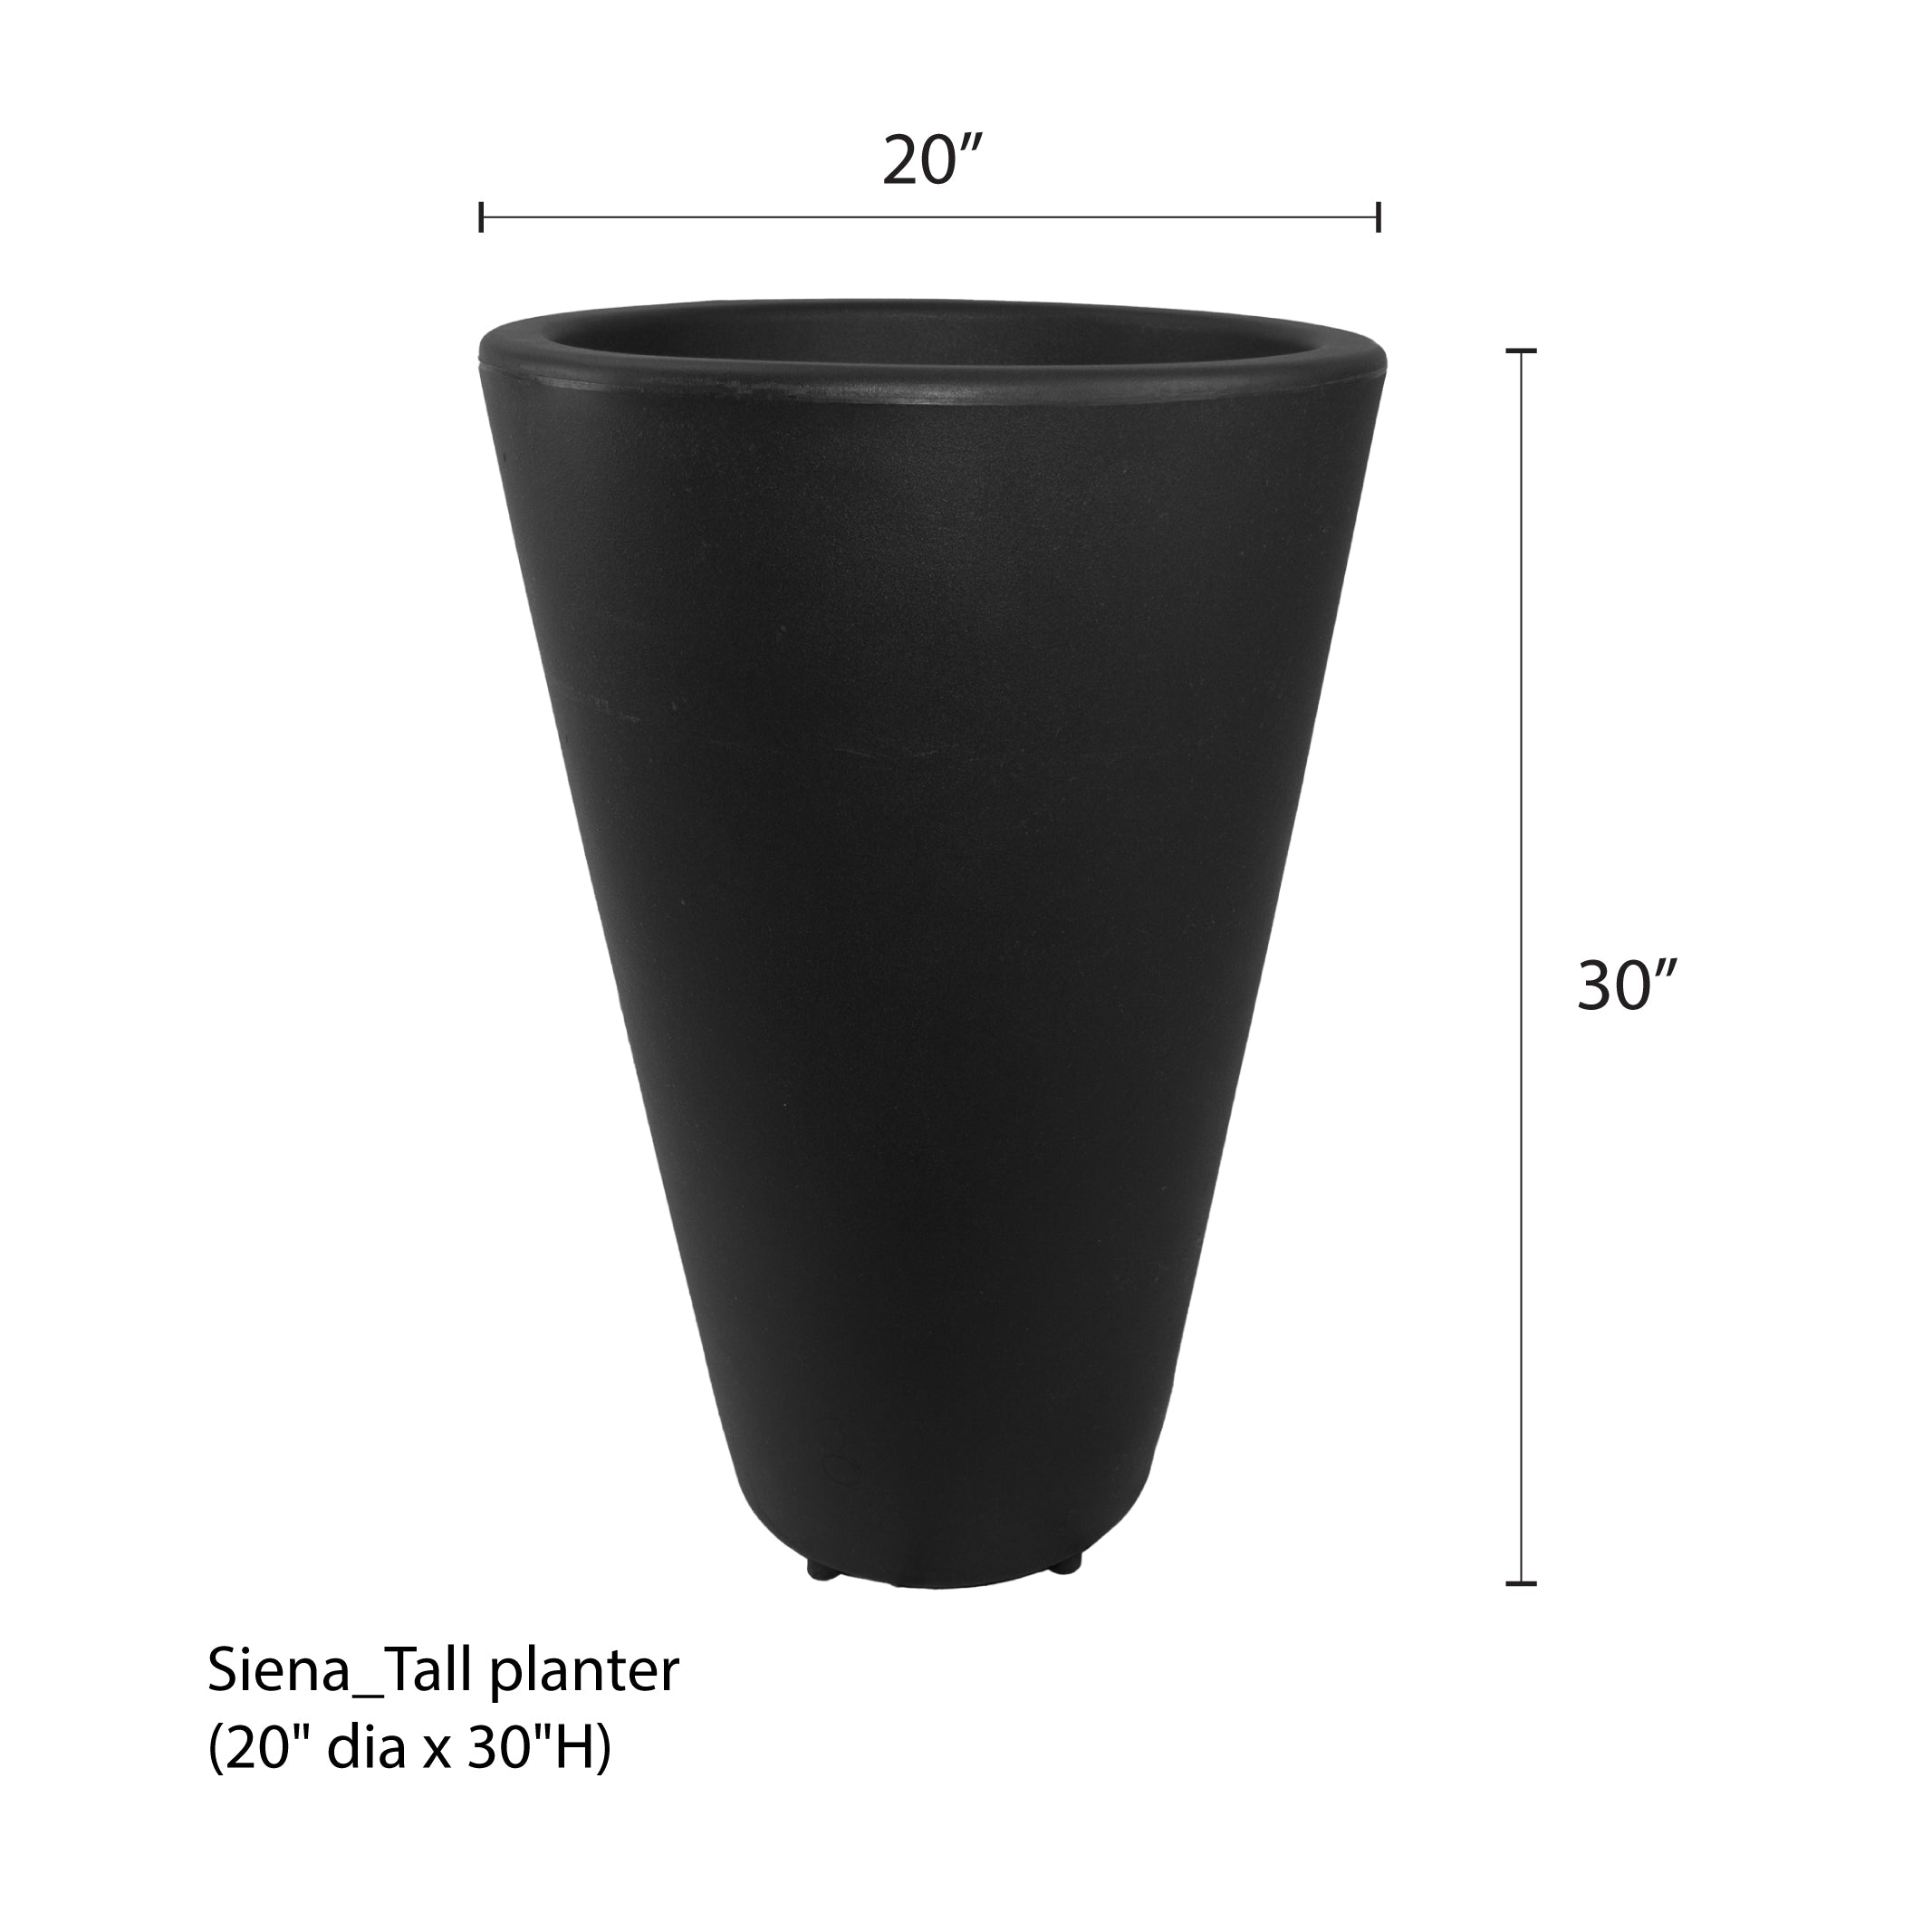 Black tall siena planter with measurements